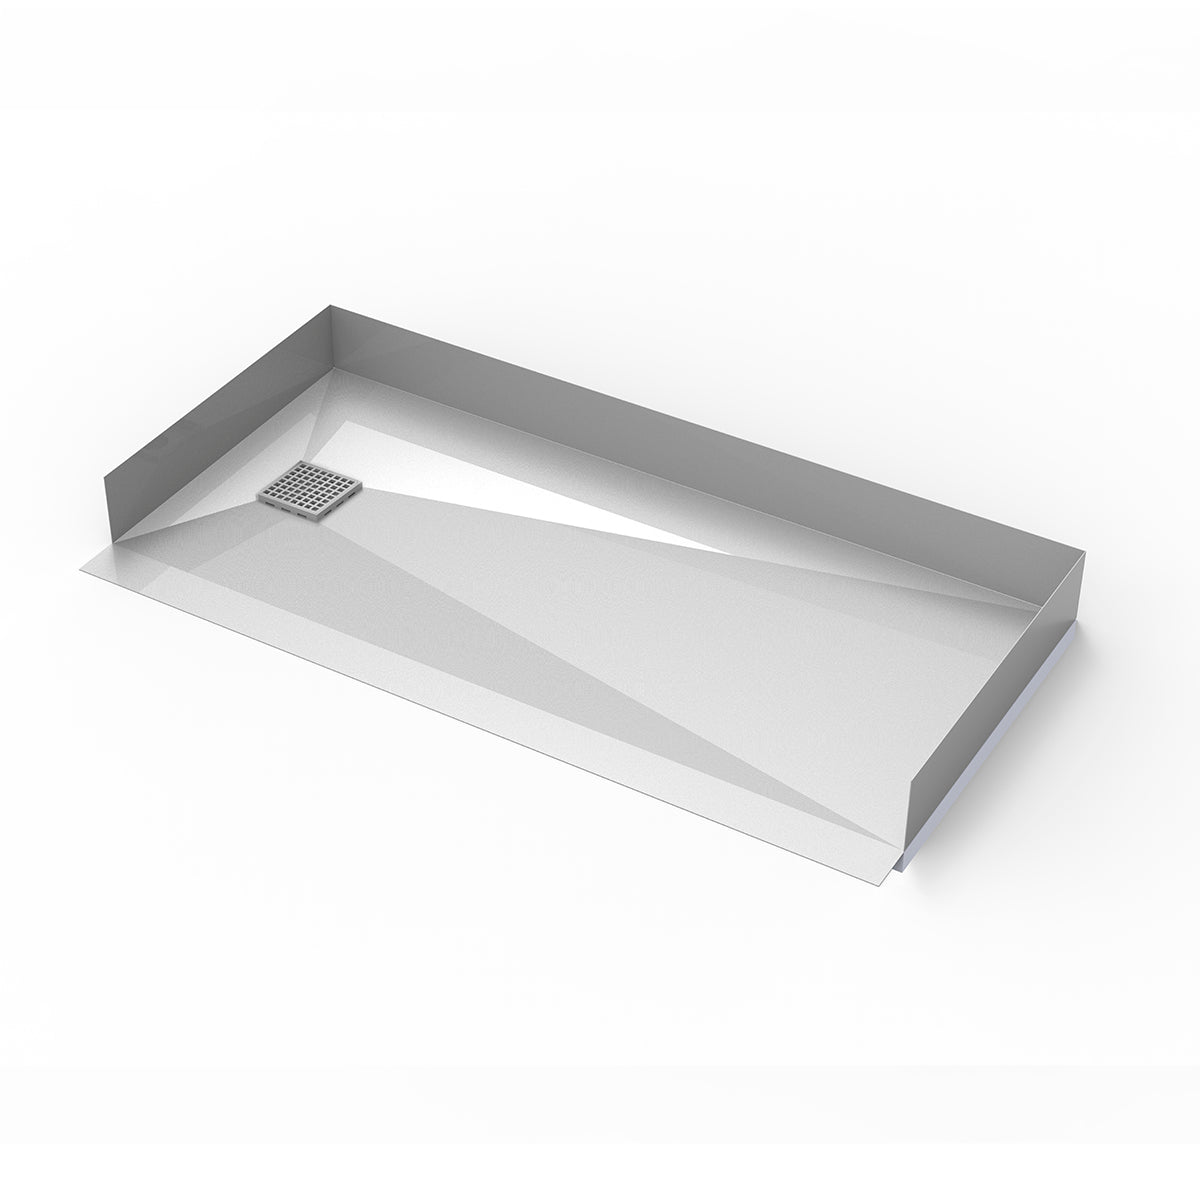 Infinity Drain 30"x 60" Curbless Stainless Steel Shower Base with Squares Pattern Left Drain location